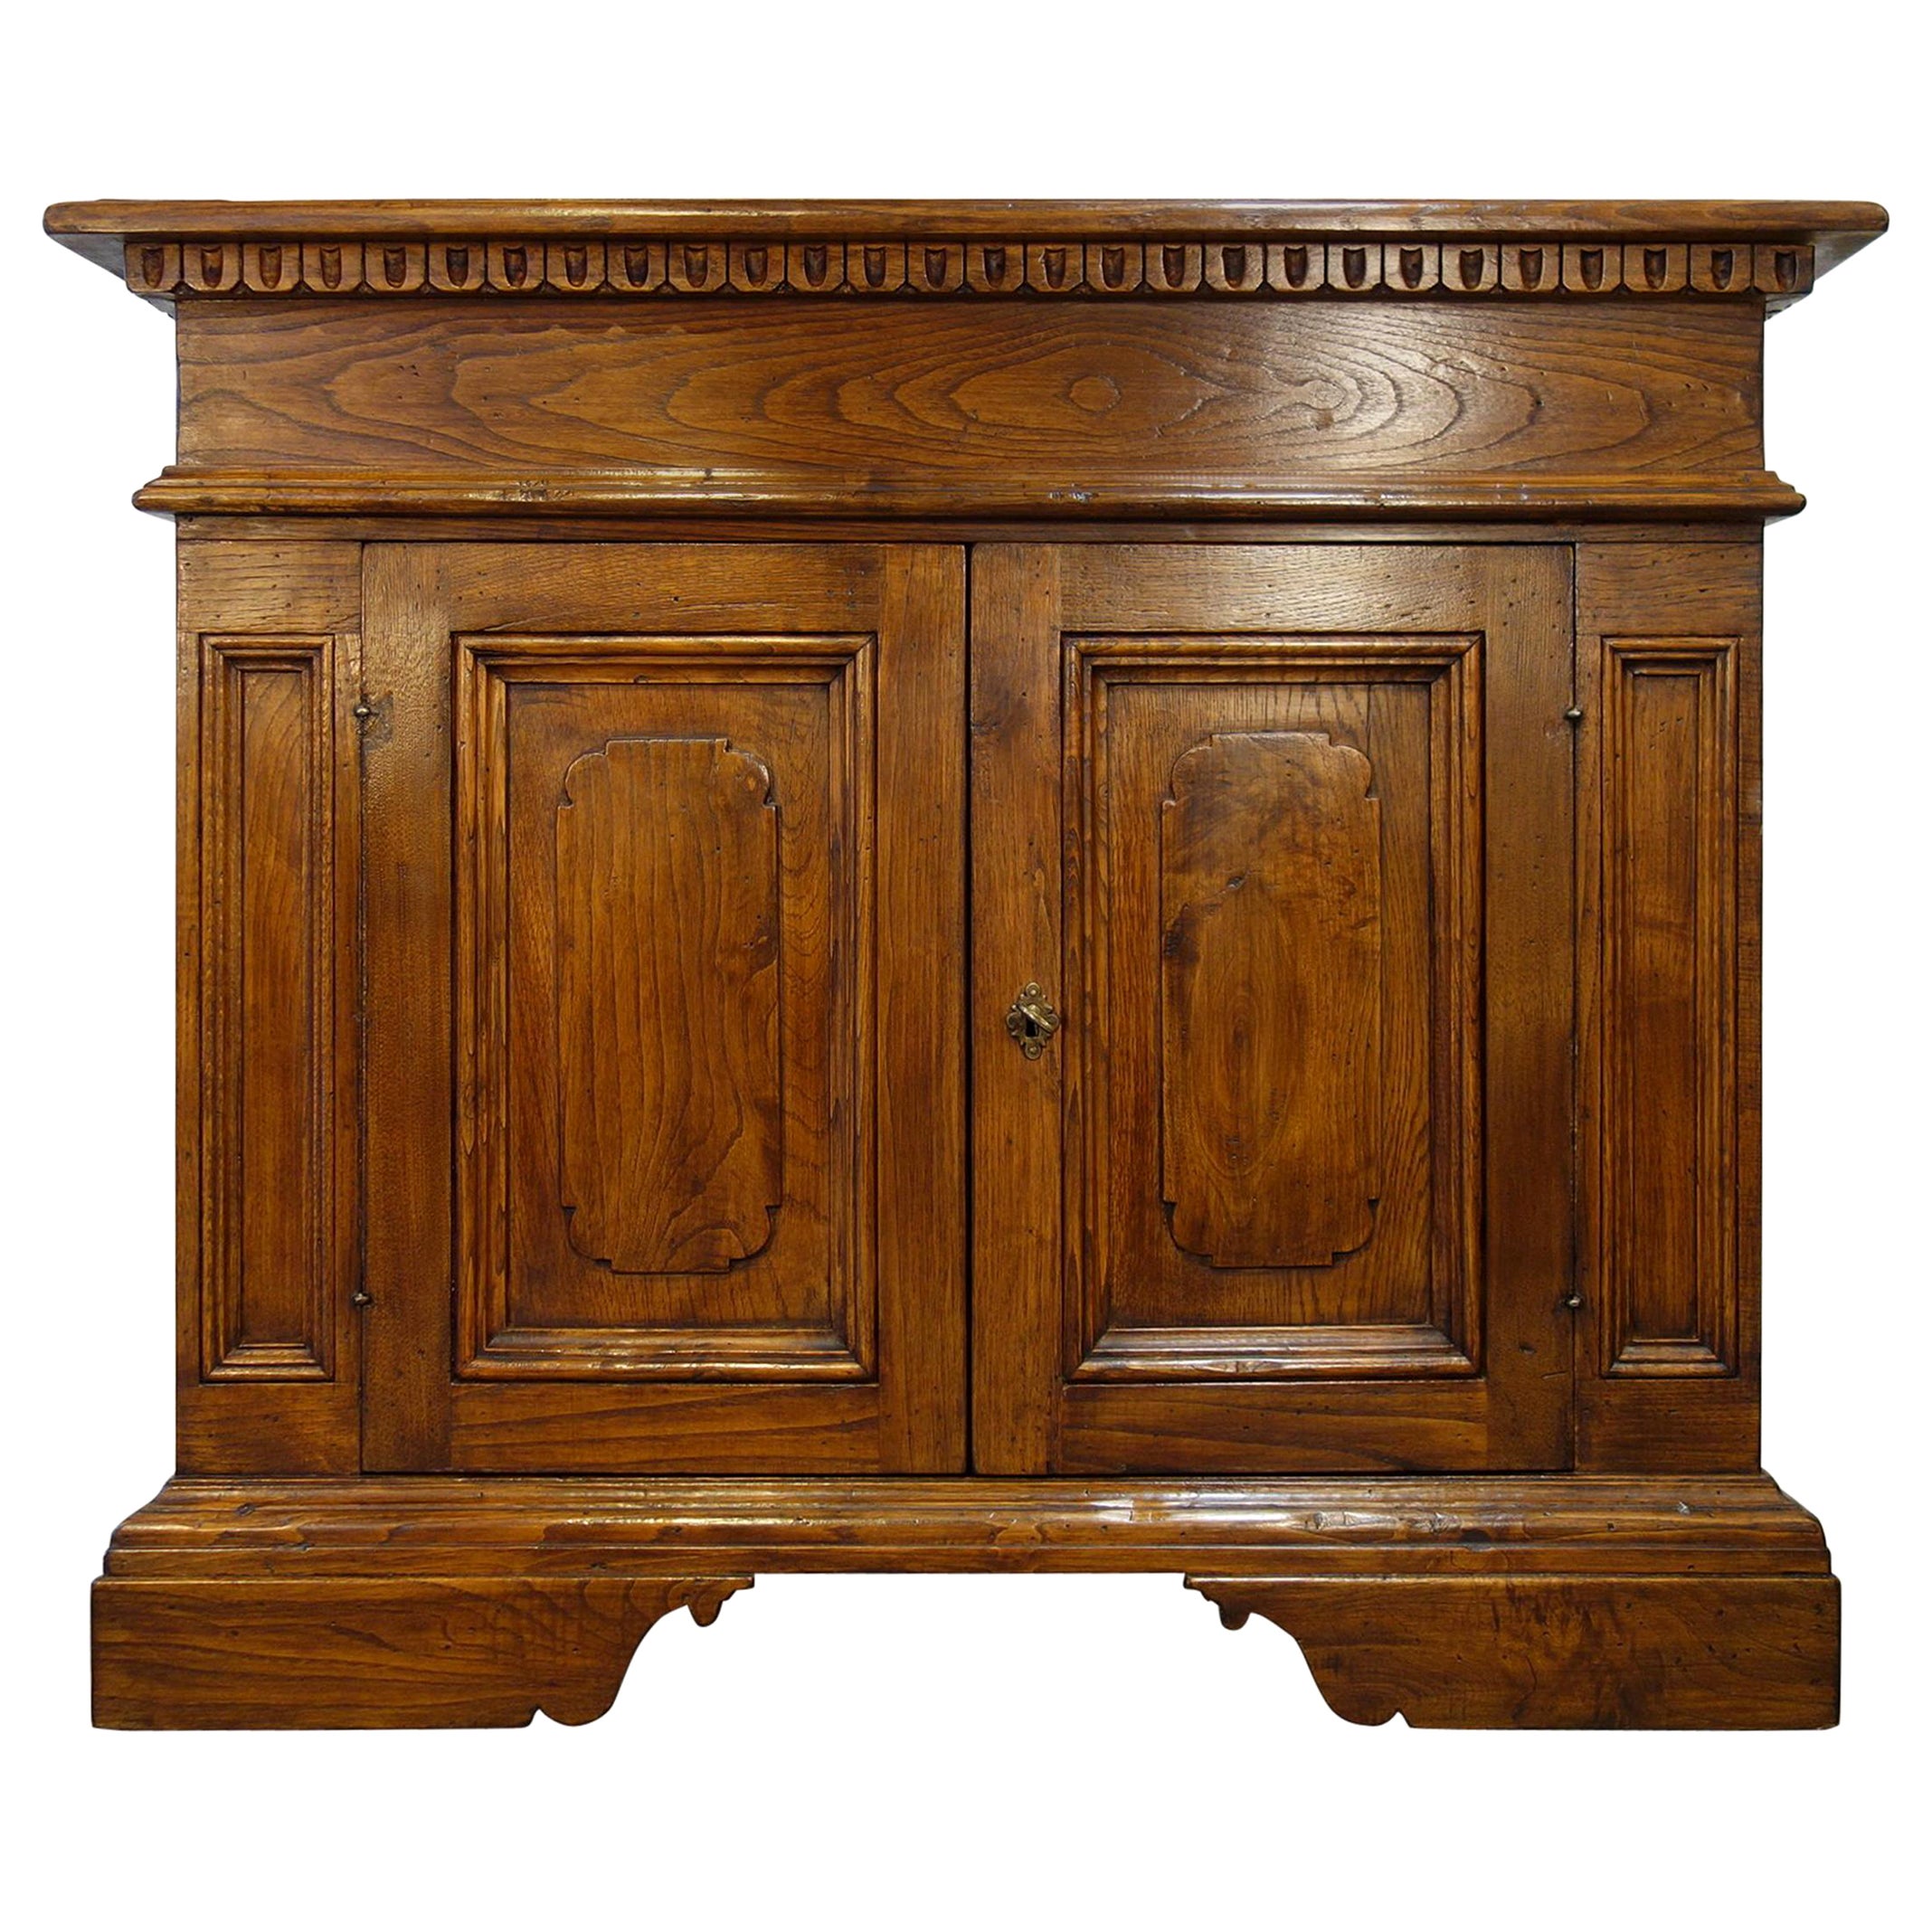 18th C Style Maggiore Old Chestnut Credenza Vanity reproduction to order options For Sale